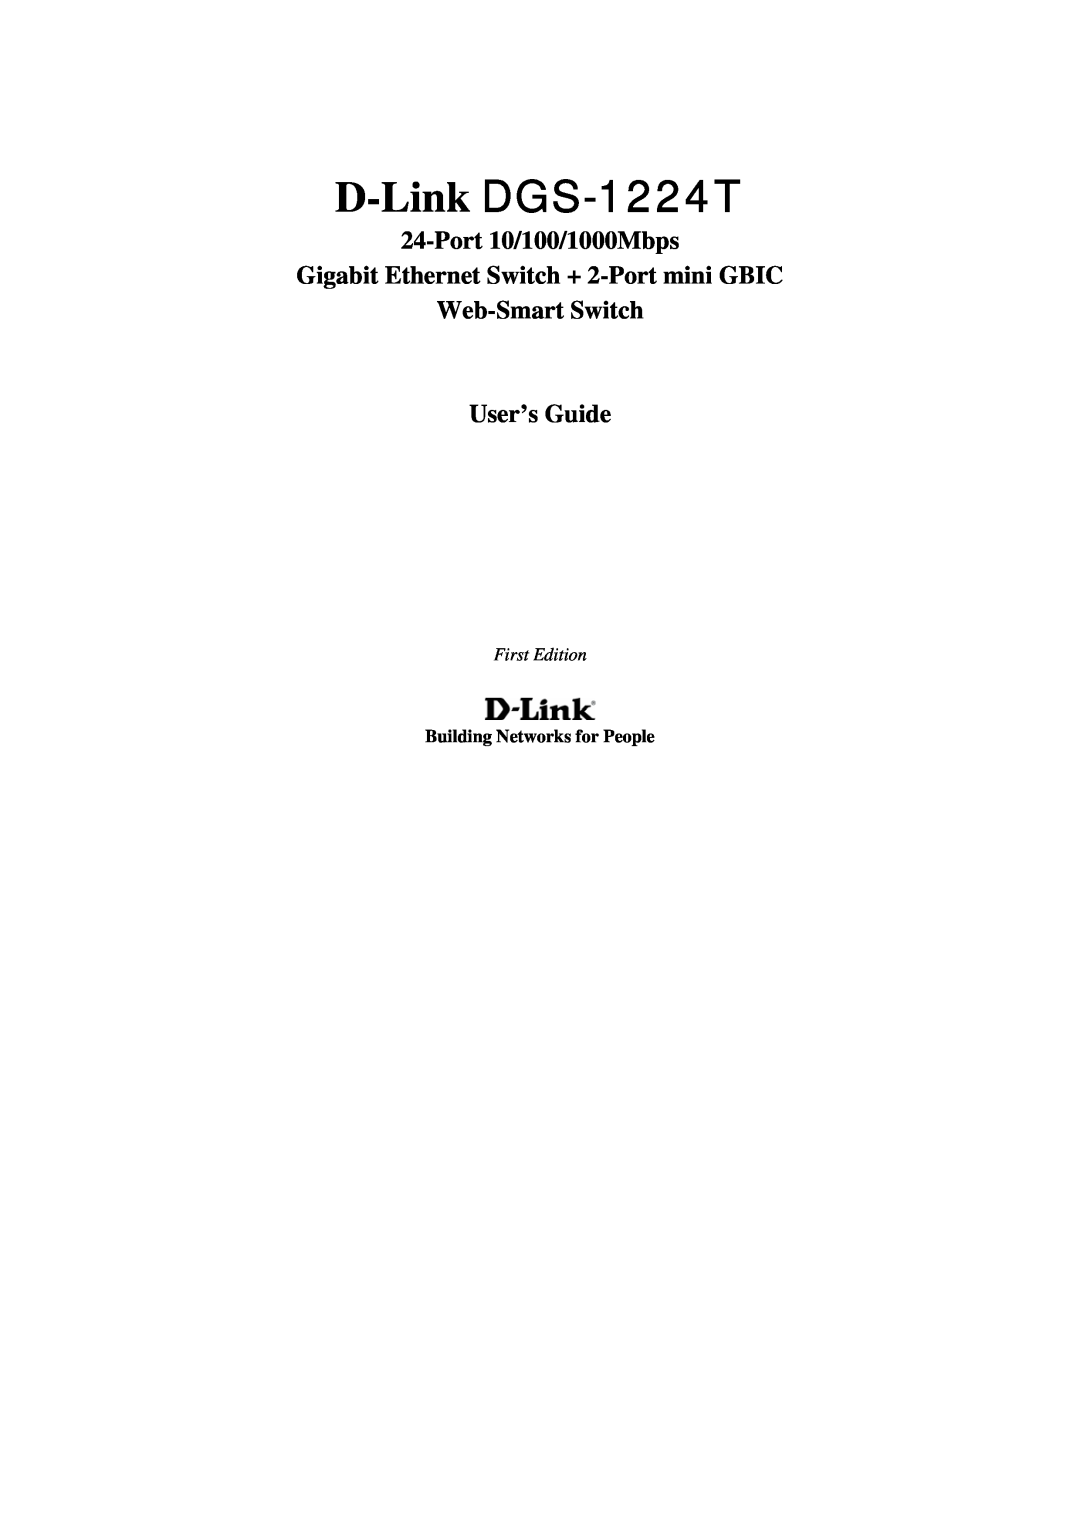 Cisco Systems manual First Edition, D-Link DGS-1224T, Port 10/100/1000Mbps Gigabit Ethernet Switch + 2-Port mini GBIC 